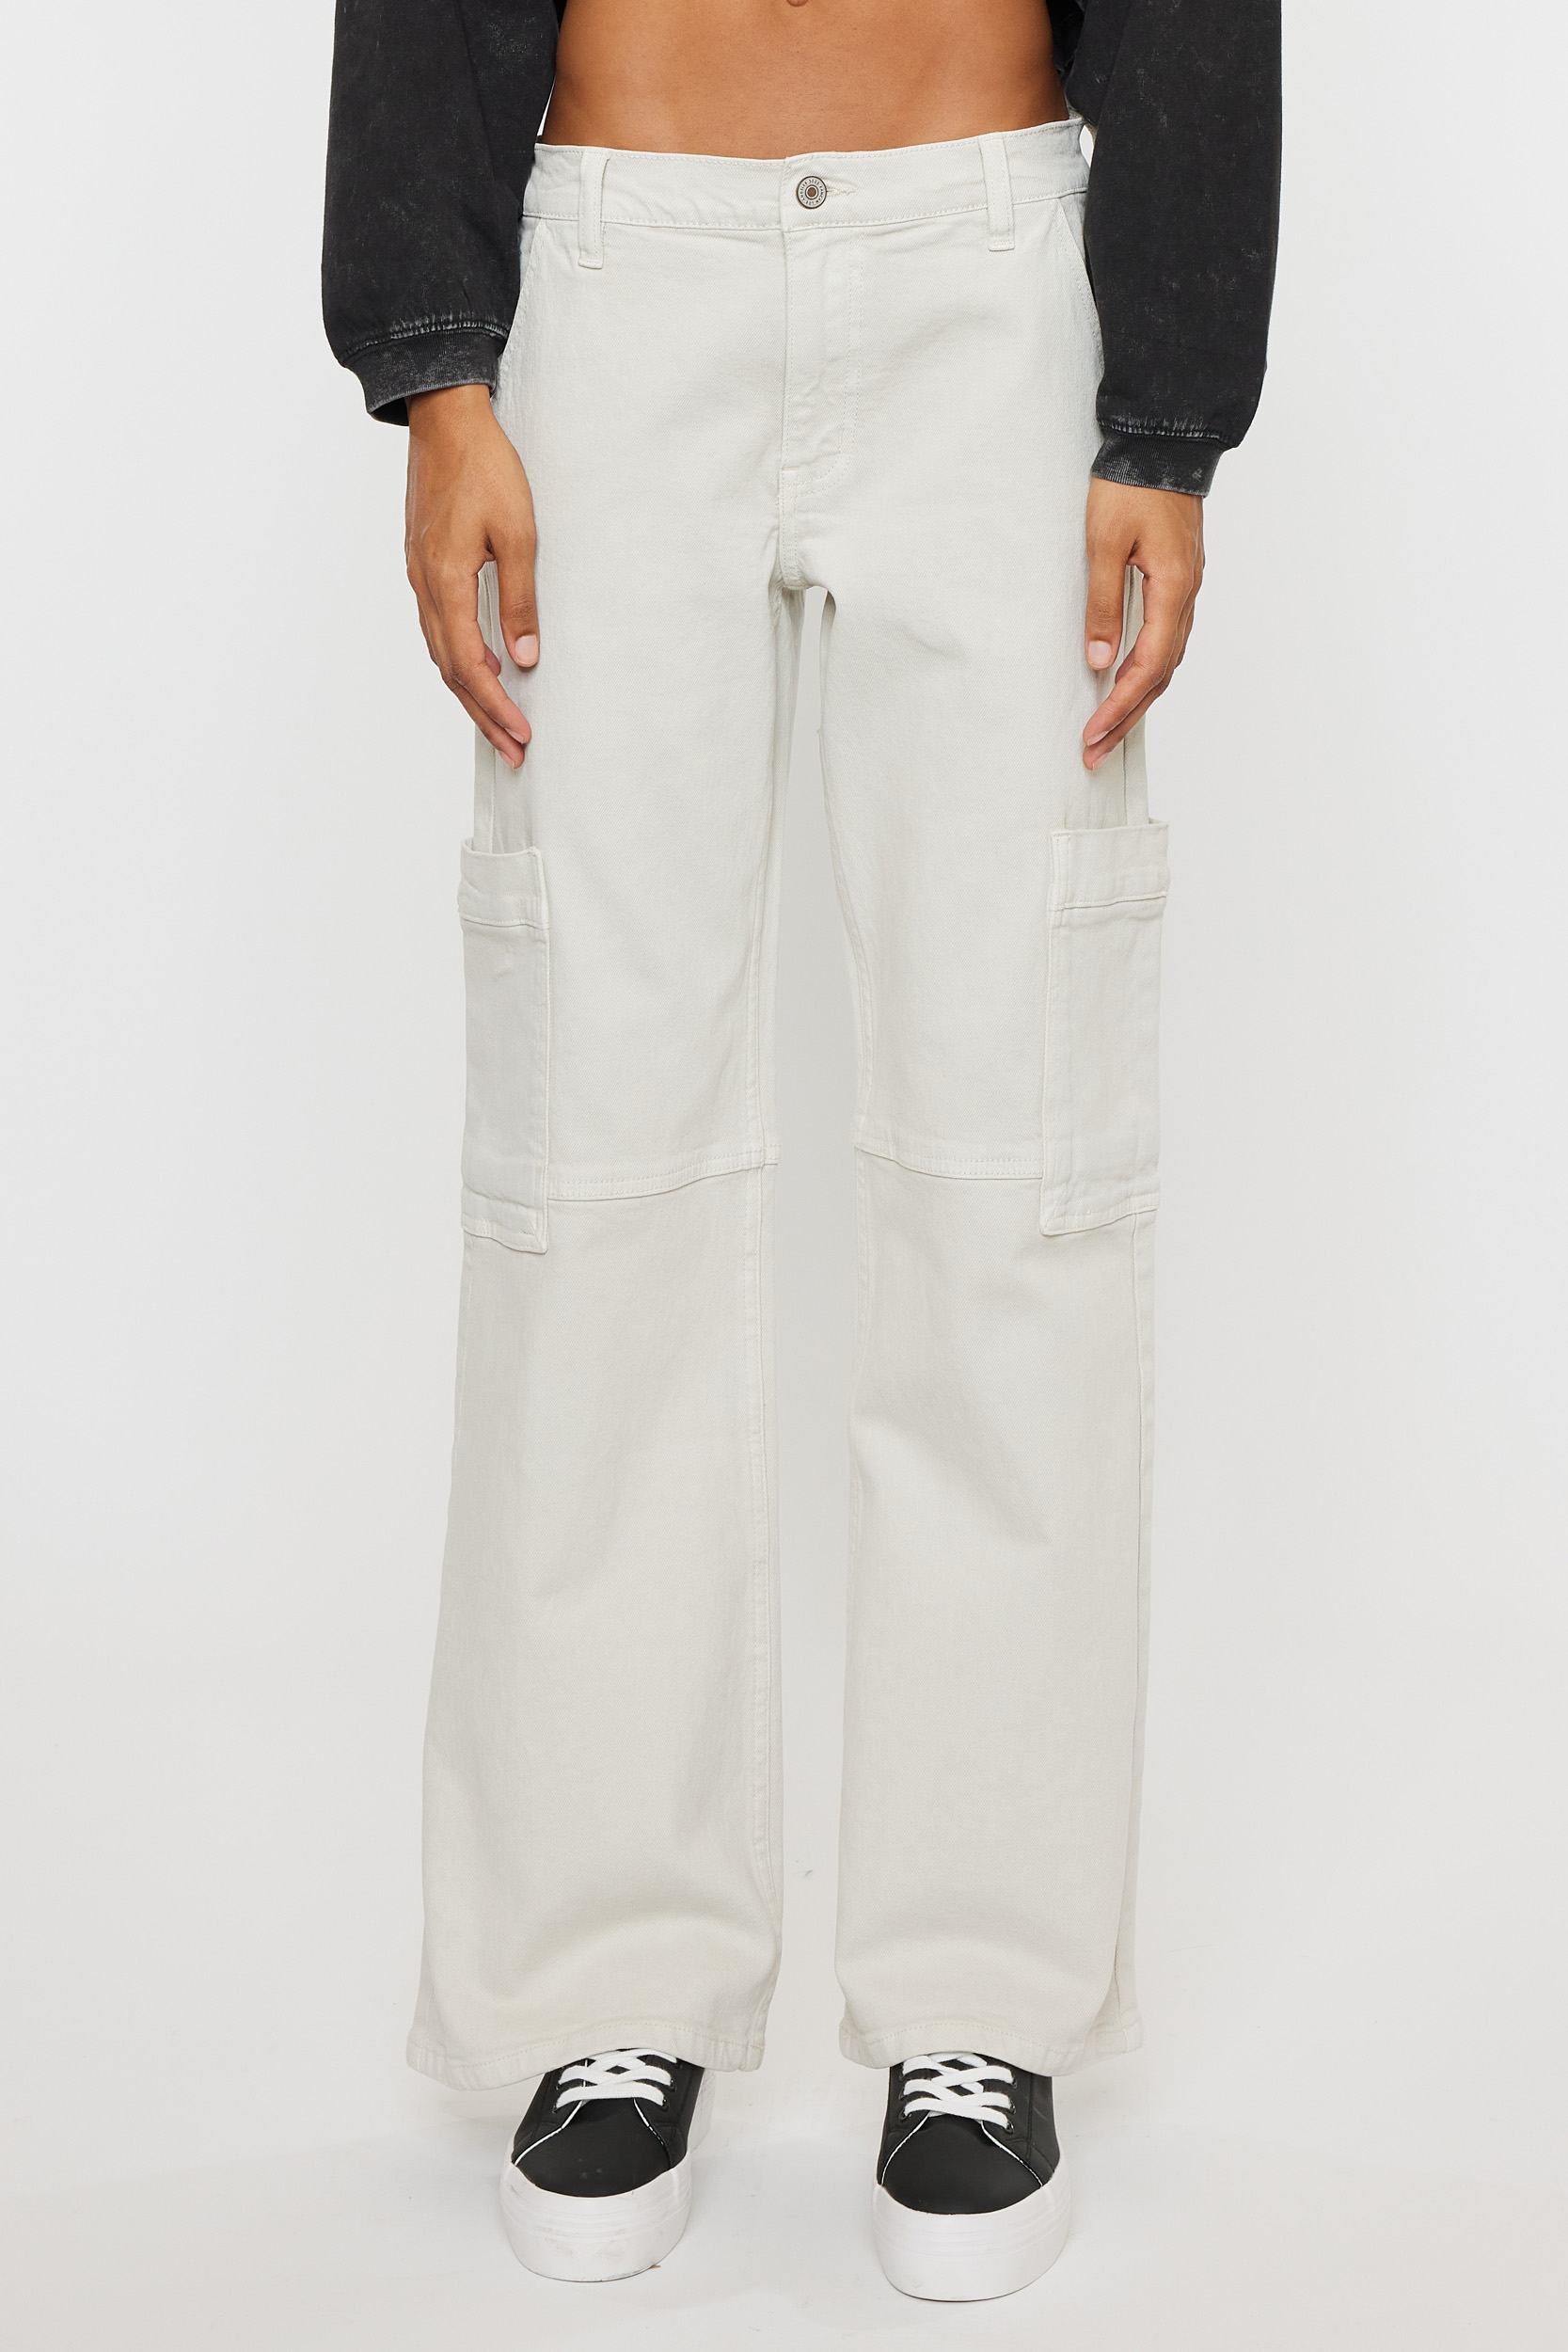 KanCan™ High Rise Relaxed Straight Leg Cargo Jean | maurices